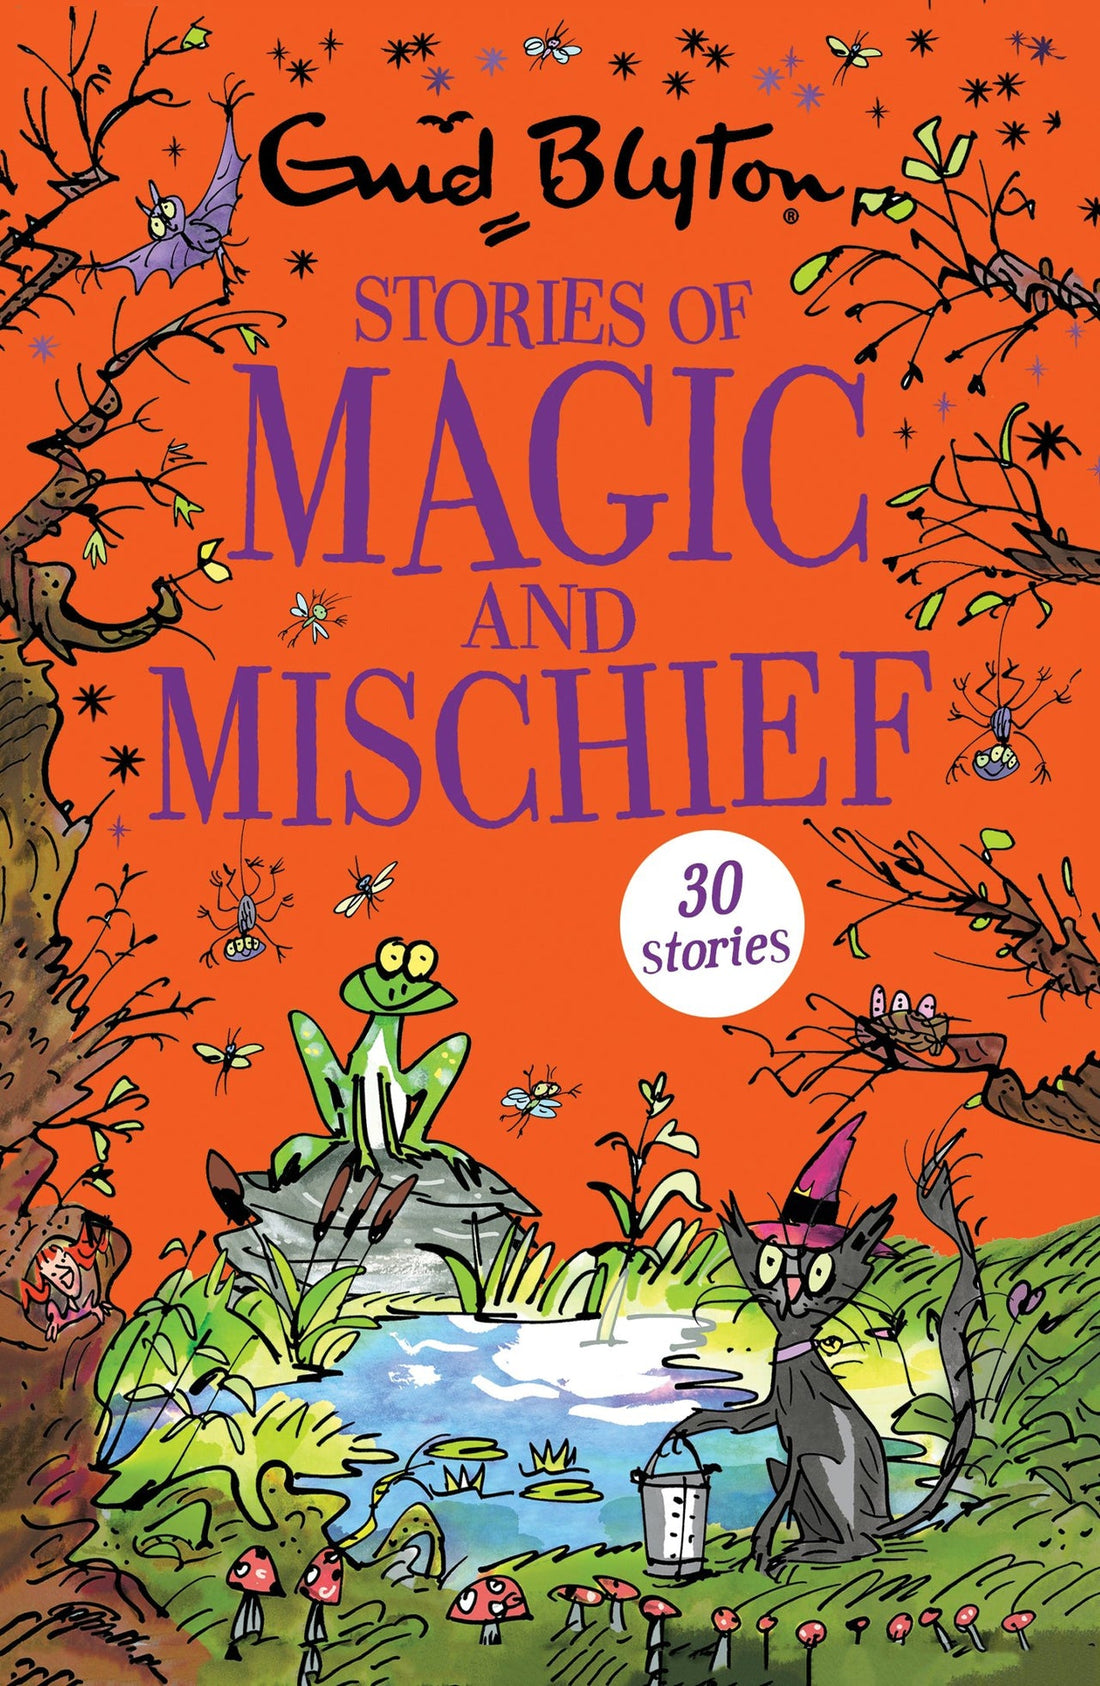 Yoto Stories of Magic and Mischief by Enid Blyton